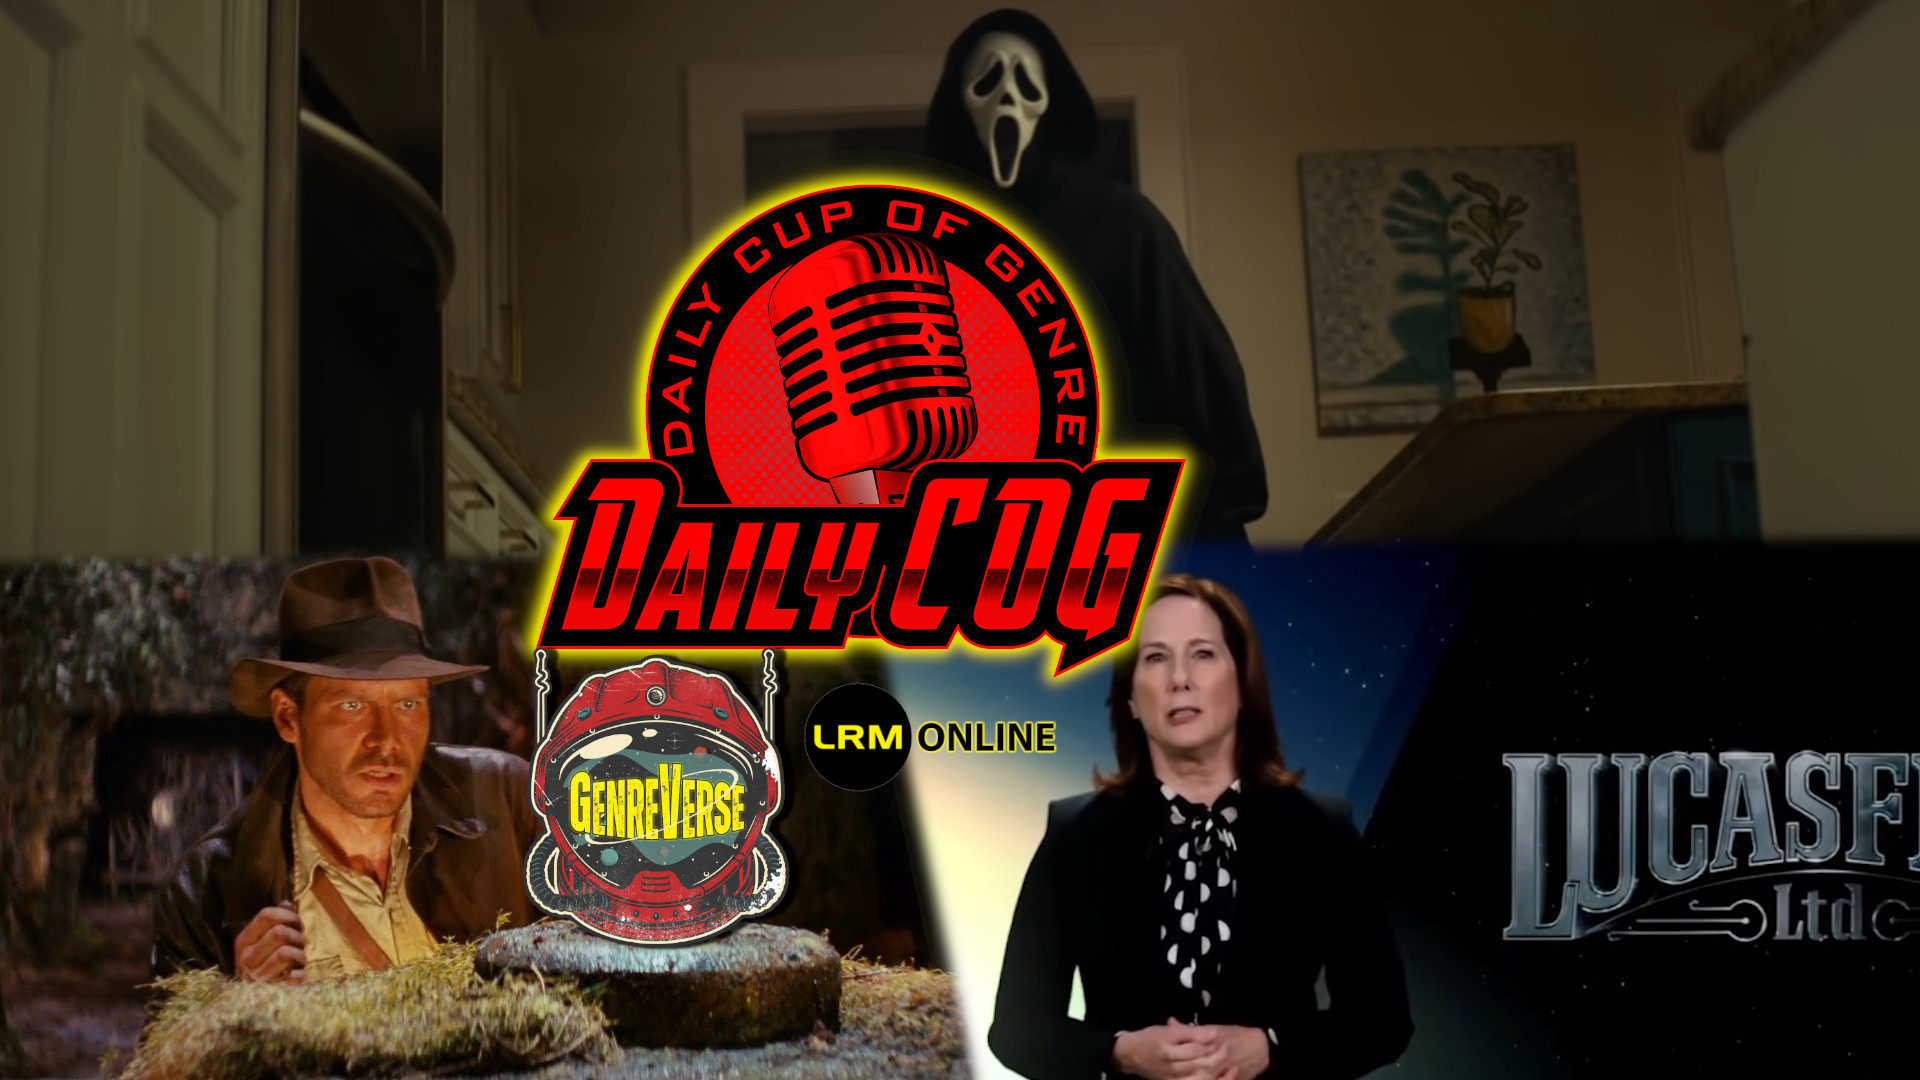 Indiana Jones 5 Plot Leak Is HUGE (Time Stamped Spoilers), Kathleen Kennedy's Goals At Lucasfilm, Friday Frights Scream 5 Trailer Reaction And Slasher Flick Picks Daily COG